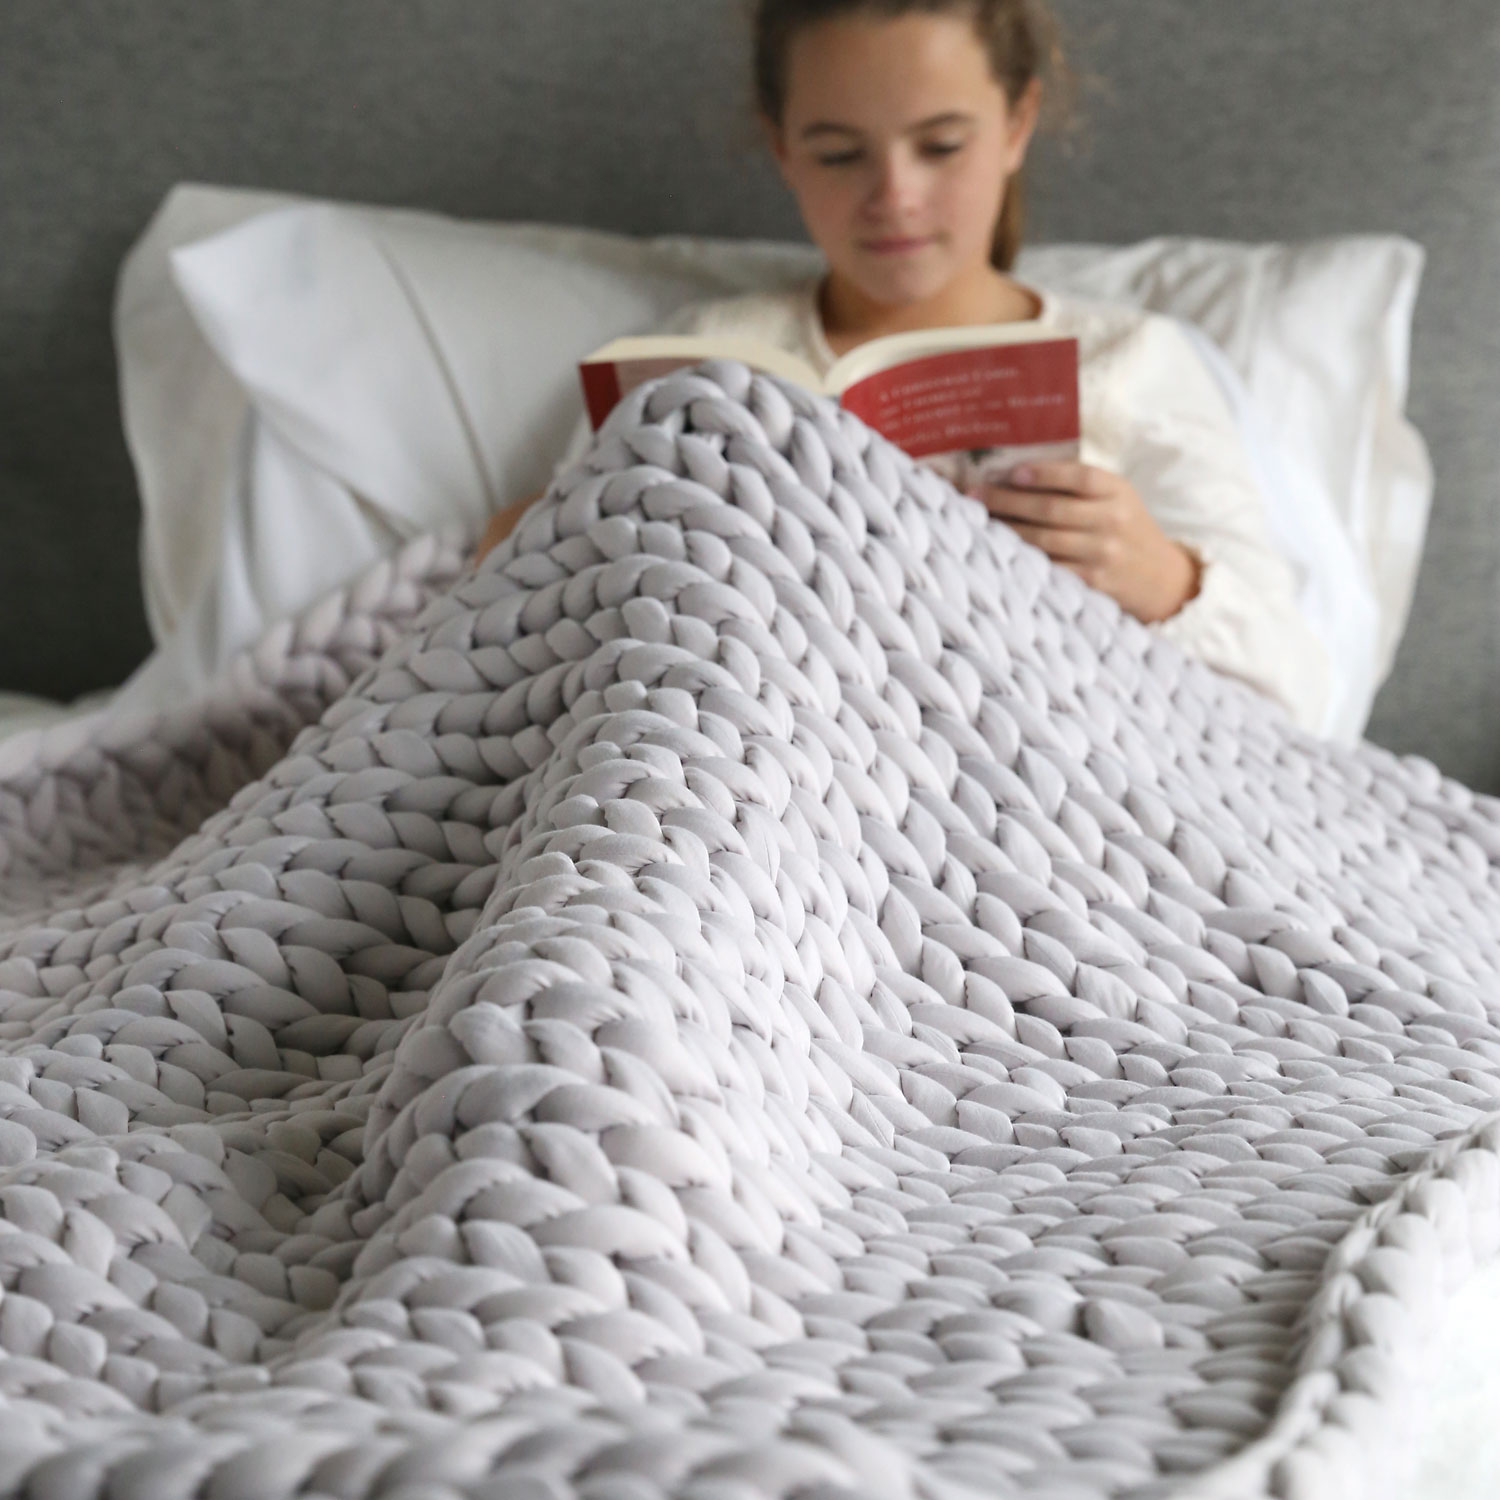 Throw Blanket Size: How Big Should Your Throw Blanket be? – Thread